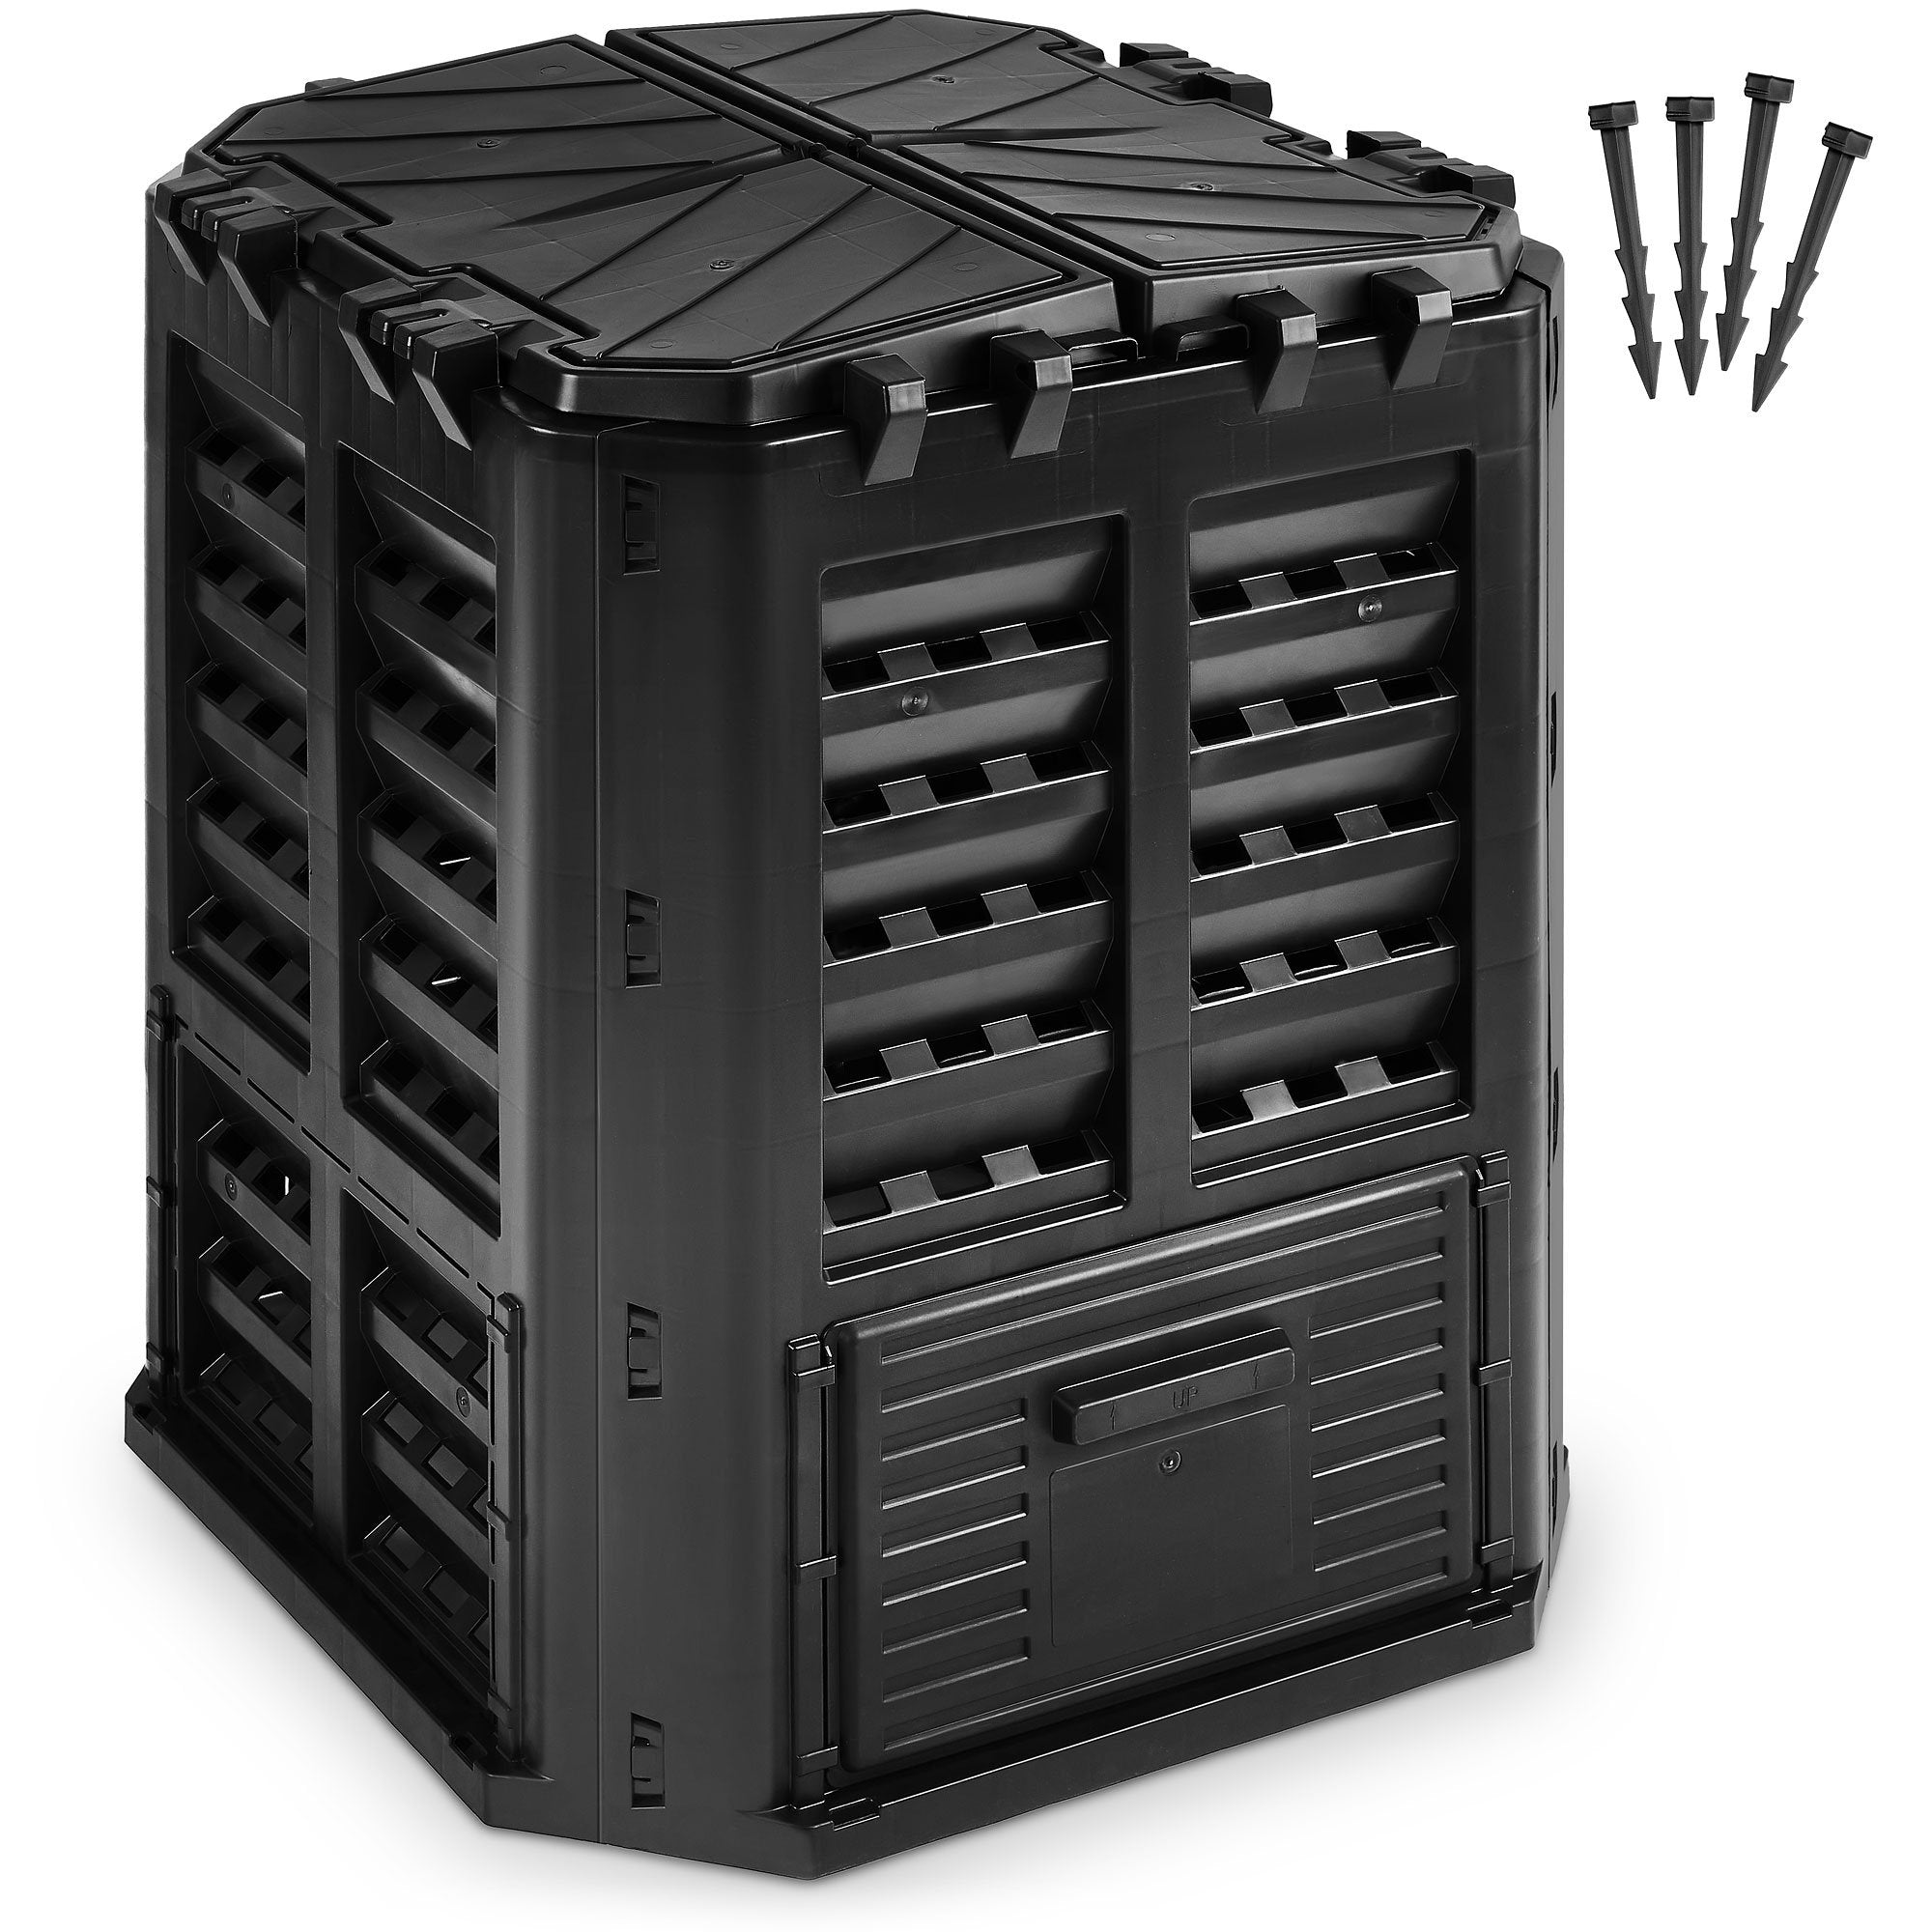  Large Compost Bin - 143 Gallon (540 L) Garden Composter with  Better Aeration System, Easy Assembling/BPA Free/Sturdy/Outdoor Compost  Tumbler : Patio, Lawn & Garden